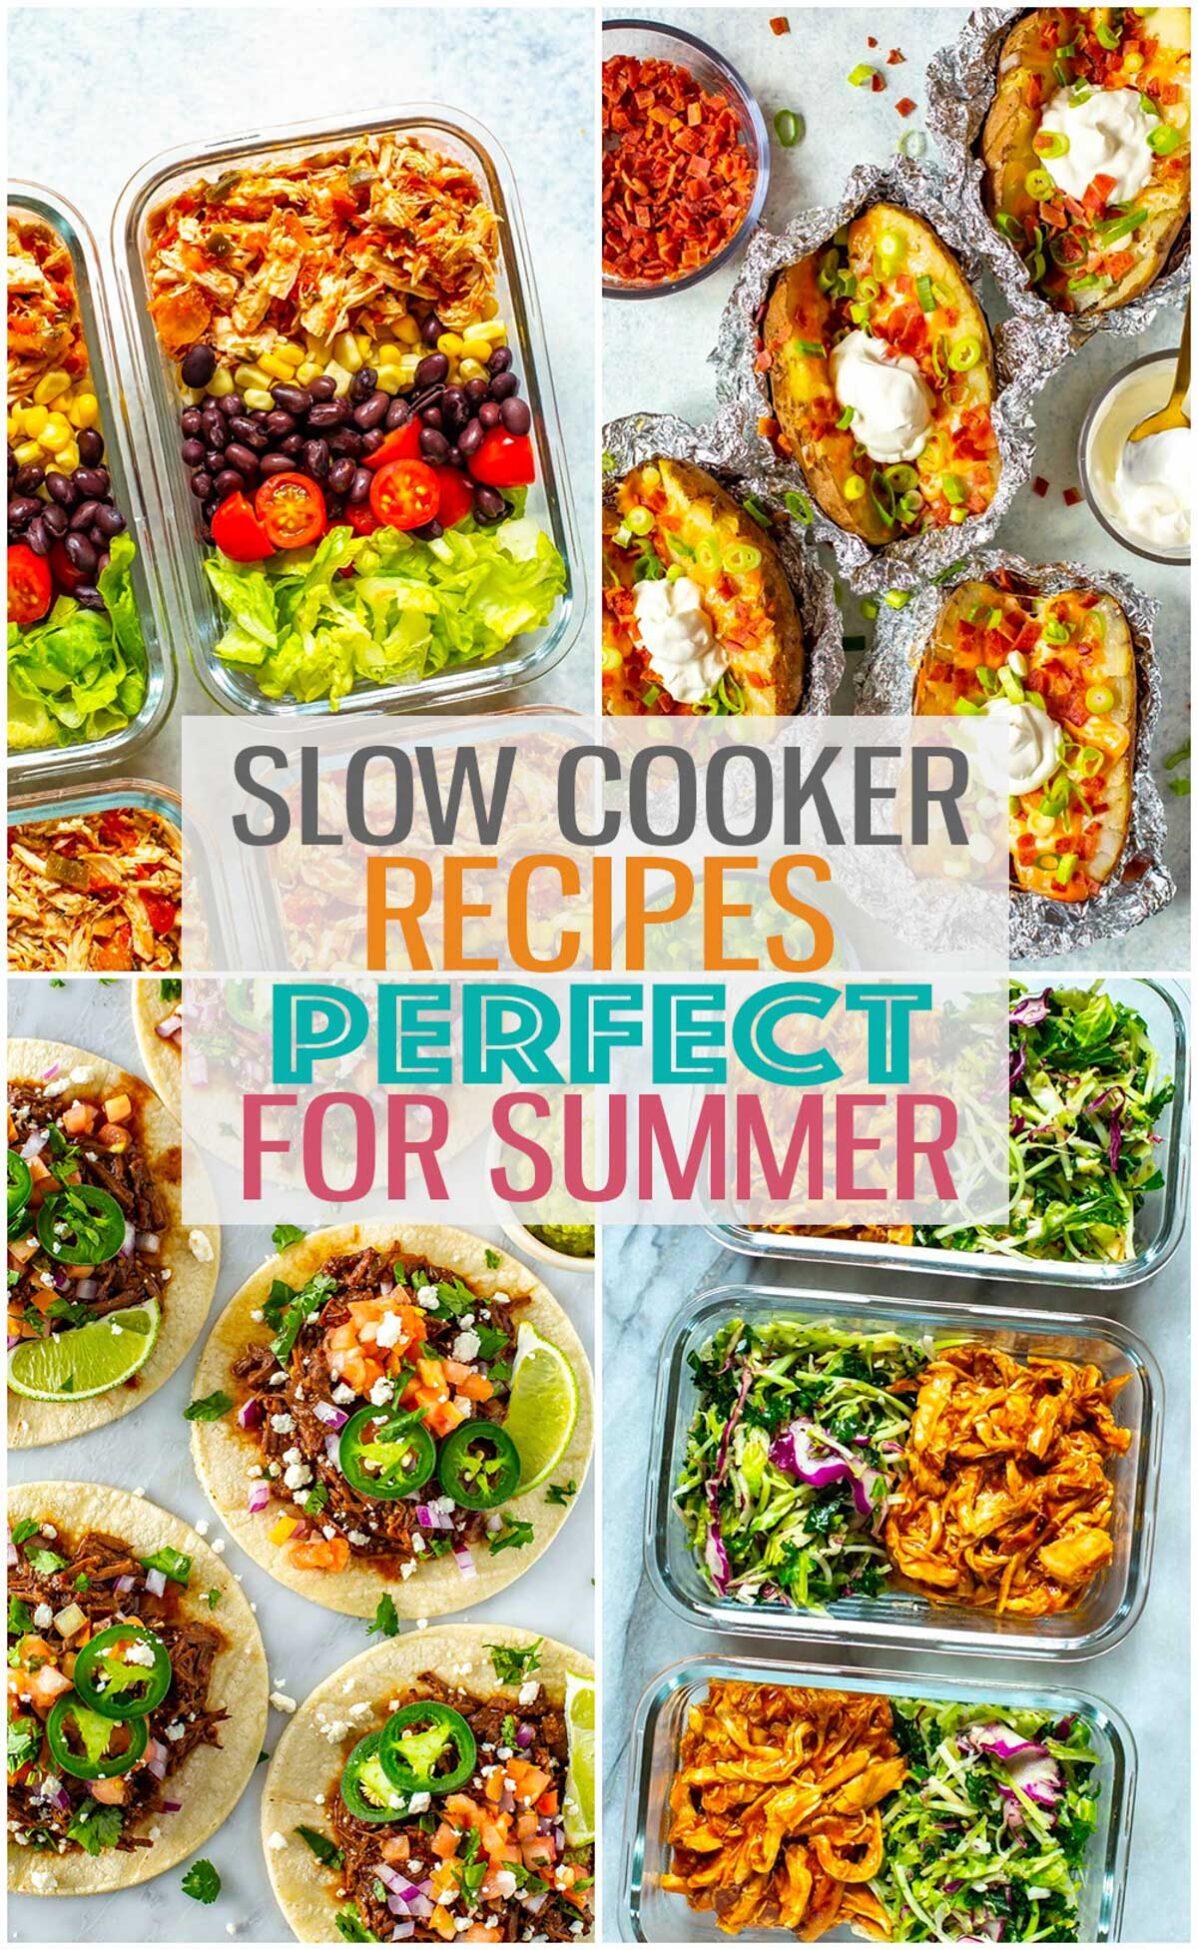 A collage of four different summer slow cooker recipes with the text "Slow Cooker Recipes Perfect For Summer" layered over top.